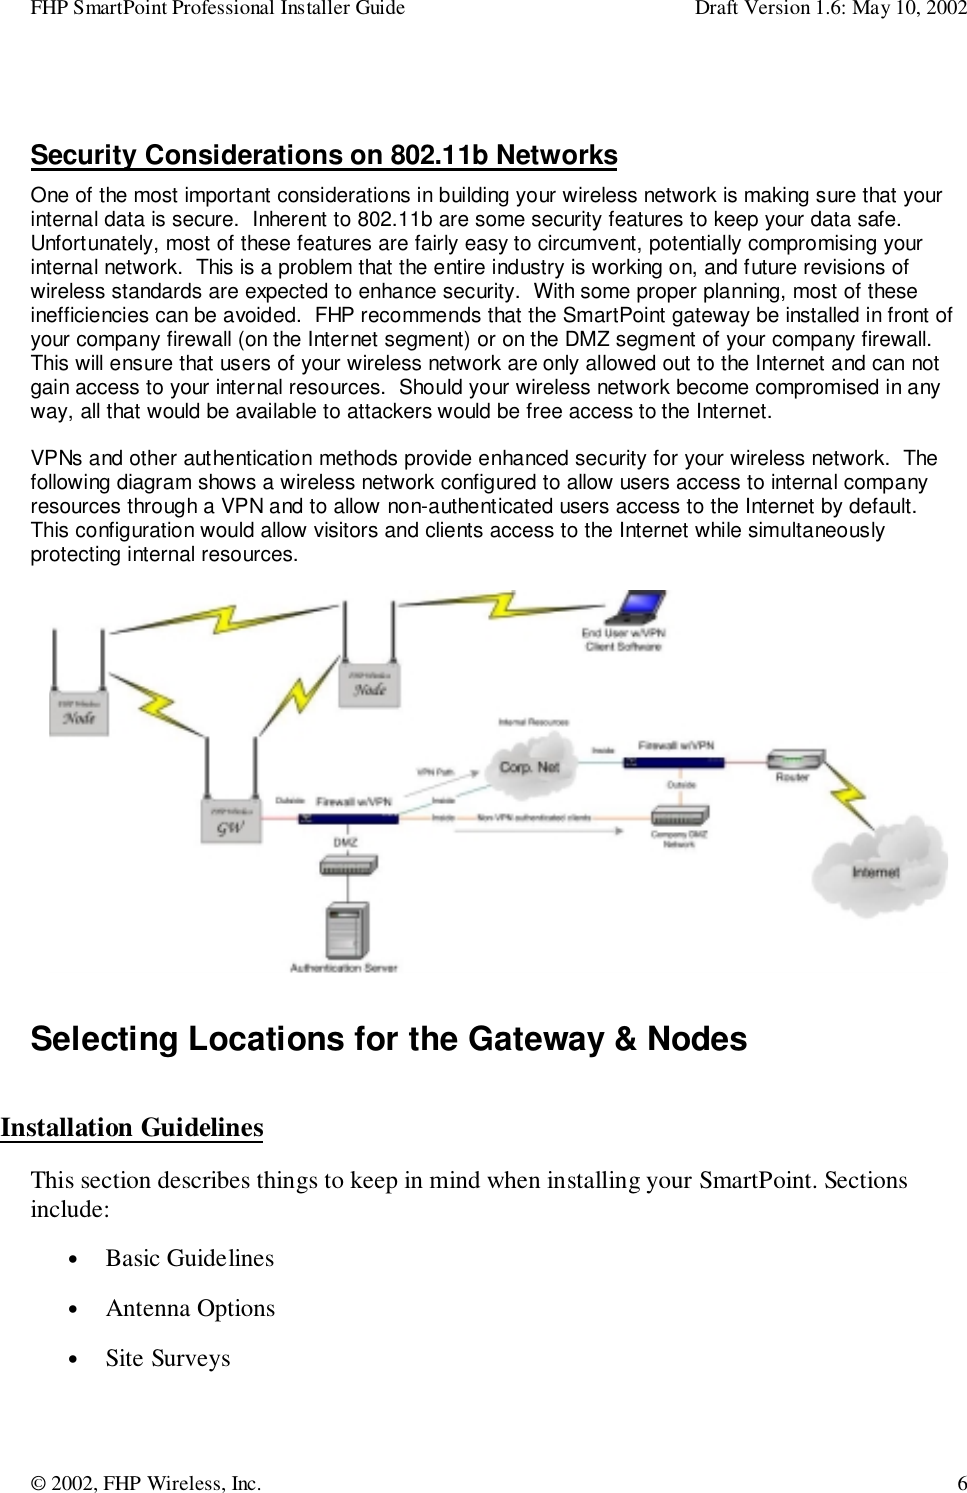 FHP SmartPoint Professional Installer Guide Draft Version 1.6: May 10, 2002© 2002, FHP Wireless, Inc. 6Security Considerations on 802.11b NetworksOne of the most important considerations in building your wireless network is making sure that yourinternal data is secure.  Inherent to 802.11b are some security features to keep your data safe.Unfortunately, most of these features are fairly easy to circumvent, potentially compromising yourinternal network.  This is a problem that the entire industry is working on, and future revisions ofwireless standards are expected to enhance security.  With some proper planning, most of theseinefficiencies can be avoided.  FHP recommends that the SmartPoint gateway be installed in front ofyour company firewall (on the Internet segment) or on the DMZ segment of your company firewall.This will ensure that users of your wireless network are only allowed out to the Internet and can notgain access to your internal resources.  Should your wireless network become compromised in anyway, all that would be available to attackers would be free access to the Internet.VPNs and other authentication methods provide enhanced security for your wireless network.  Thefollowing diagram shows a wireless network configured to allow users access to internal companyresources through a VPN and to allow non-authenticated users access to the Internet by default.This configuration would allow visitors and clients access to the Internet while simultaneouslyprotecting internal resources.Selecting Locations for the Gateway &amp; NodesInstallation GuidelinesThis section describes things to keep in mind when installing your SmartPoint. Sectionsinclude:• Basic Guidelines• Antenna Options• Site Surveys